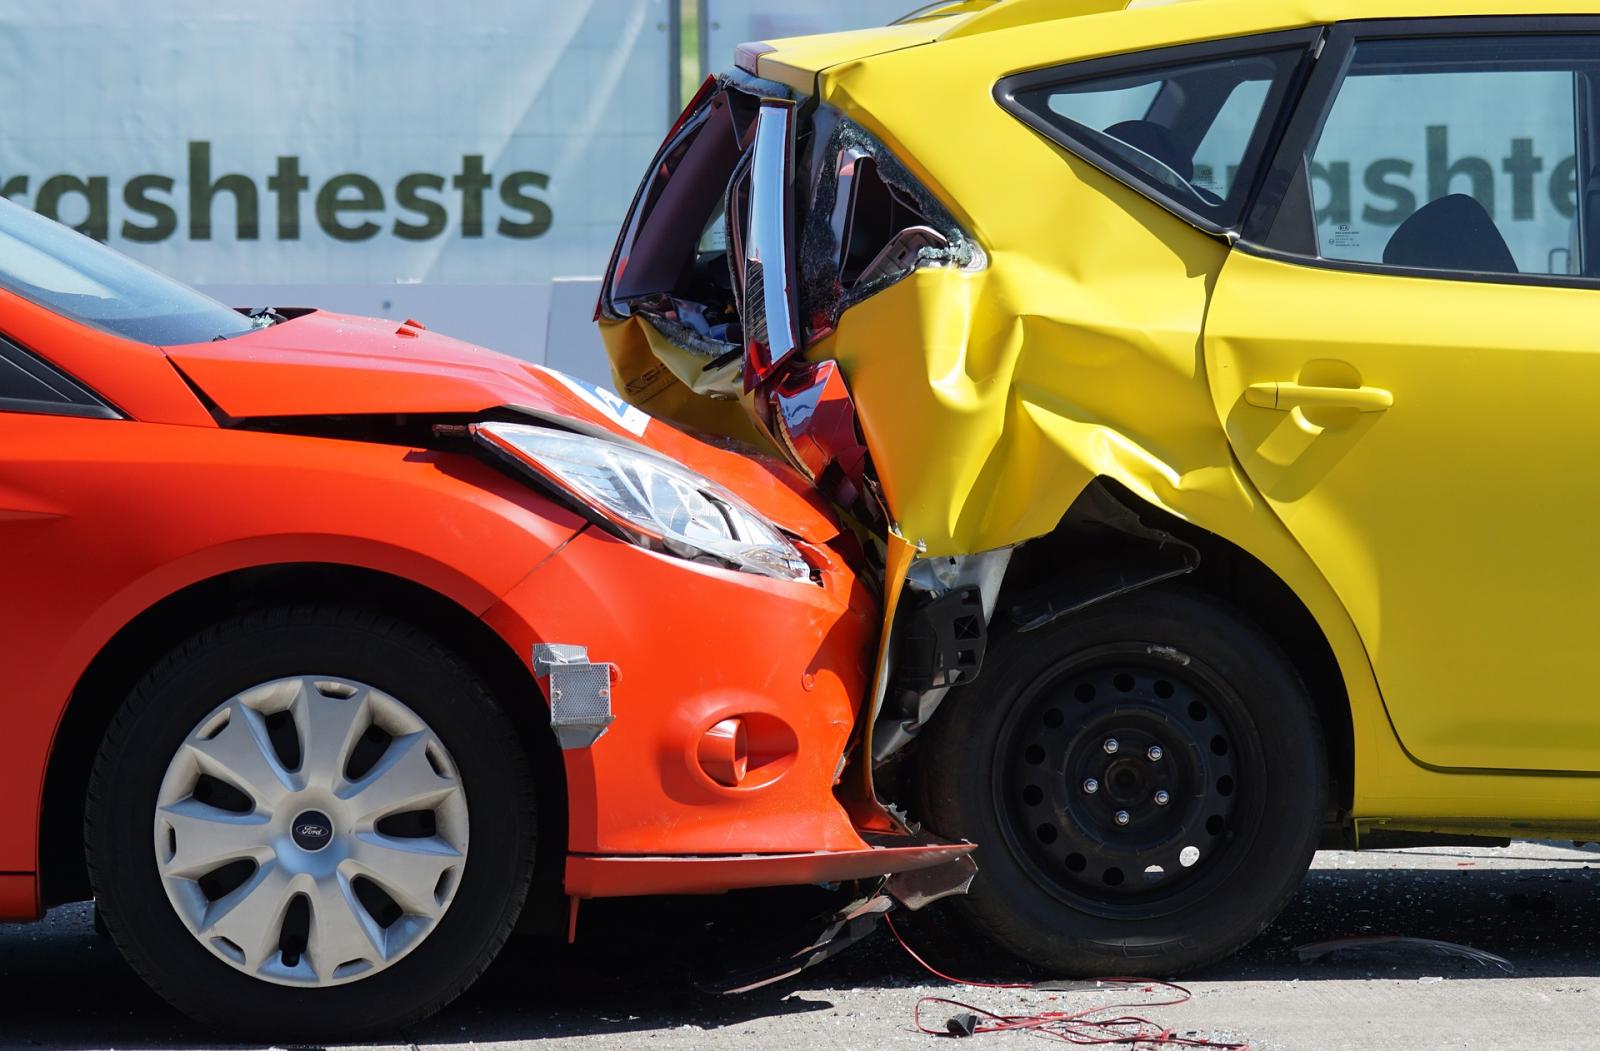 How do modern cars protect you in a car crash?